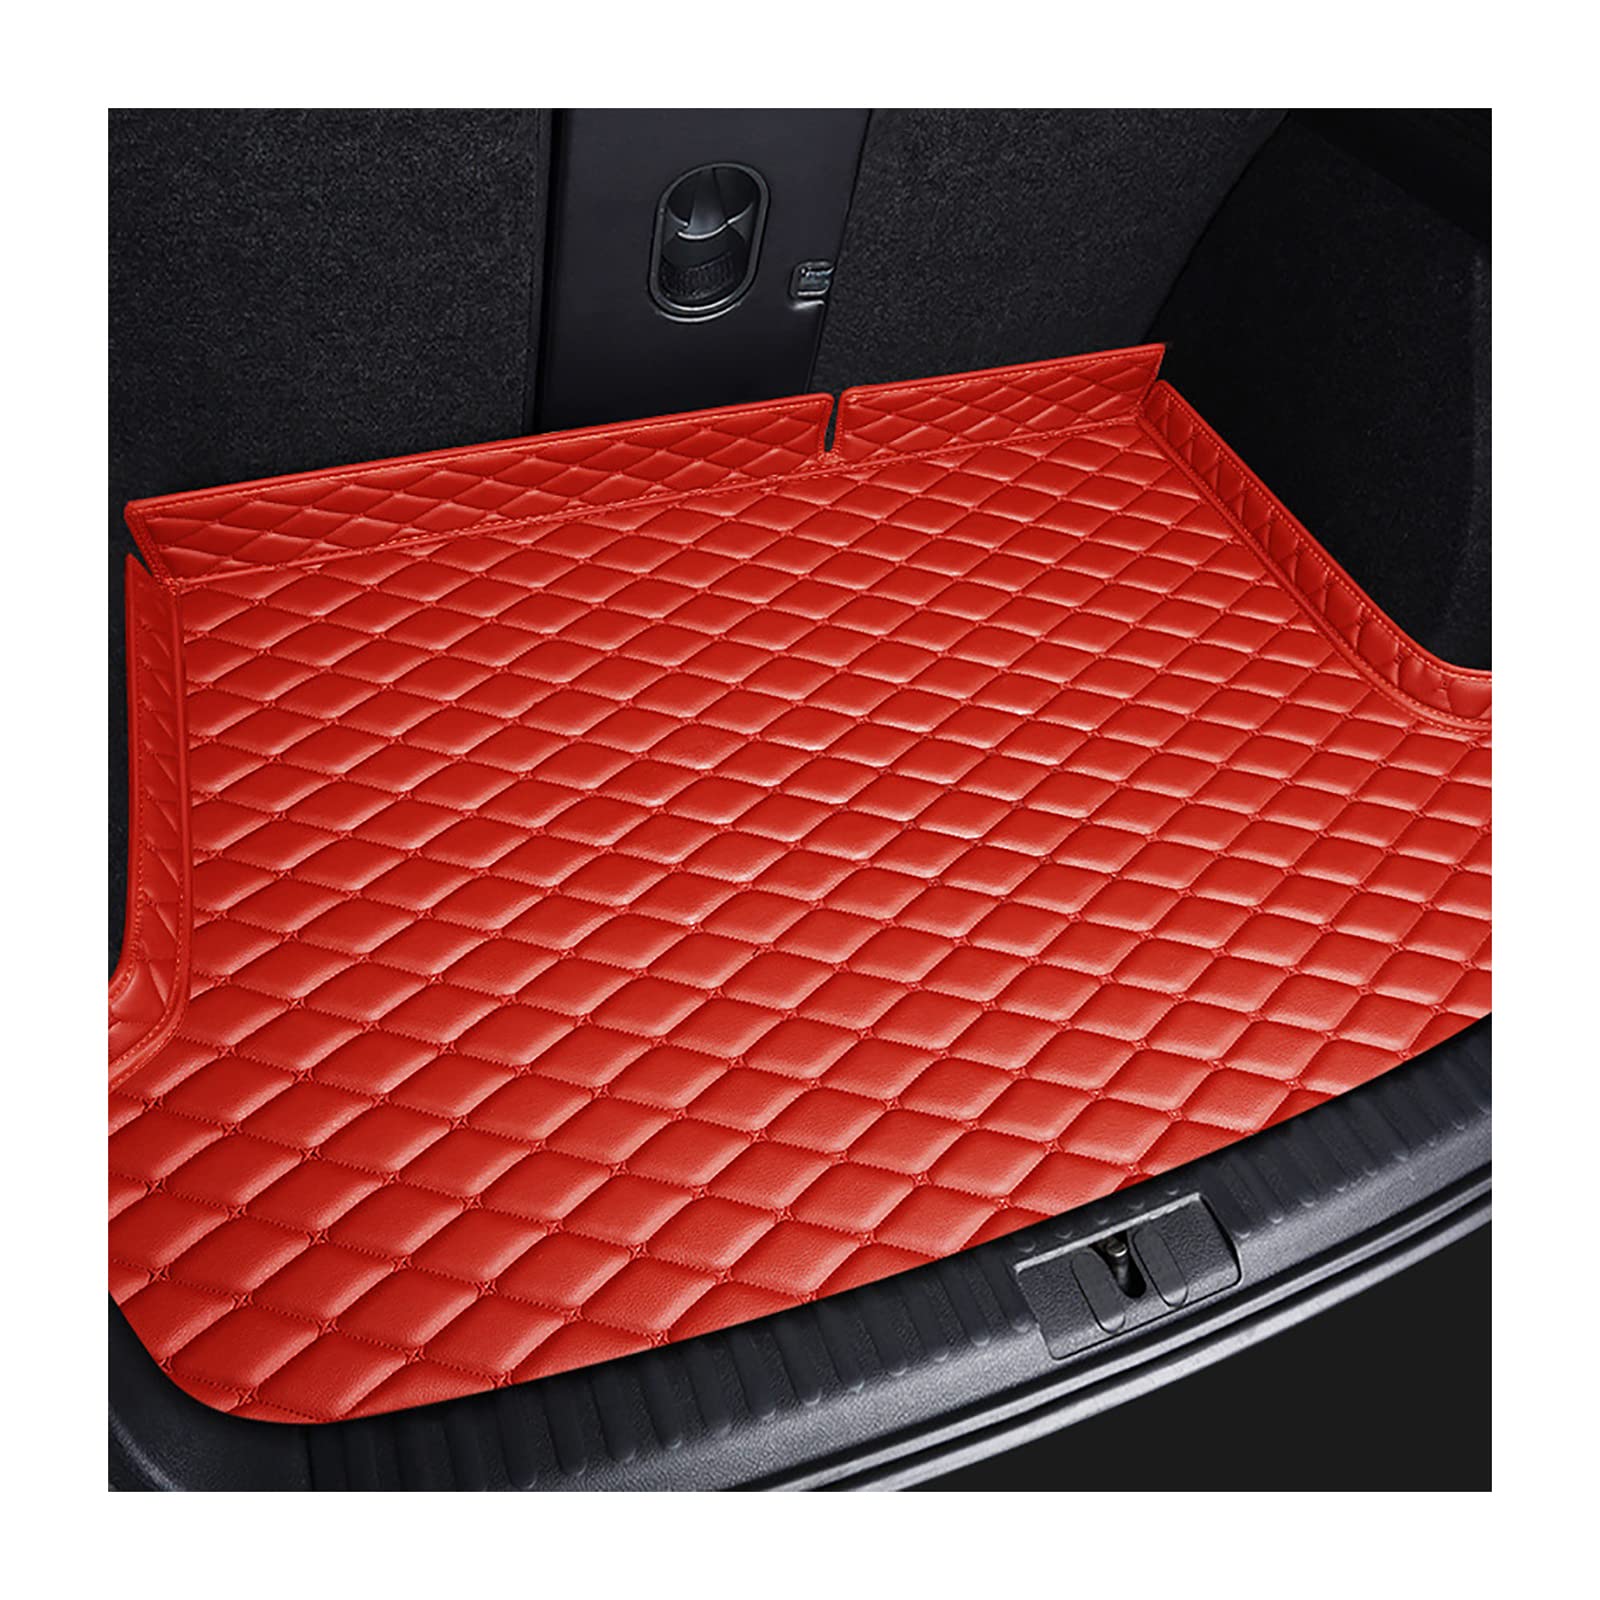 Car Boot Protection Mat mit Erhöhtem Rand, Kompatibel mit BMW 6 Series F13 Coupe 2011-2017, Boot Protector Boot Mat Accessories,6-Red von YPGHBHD